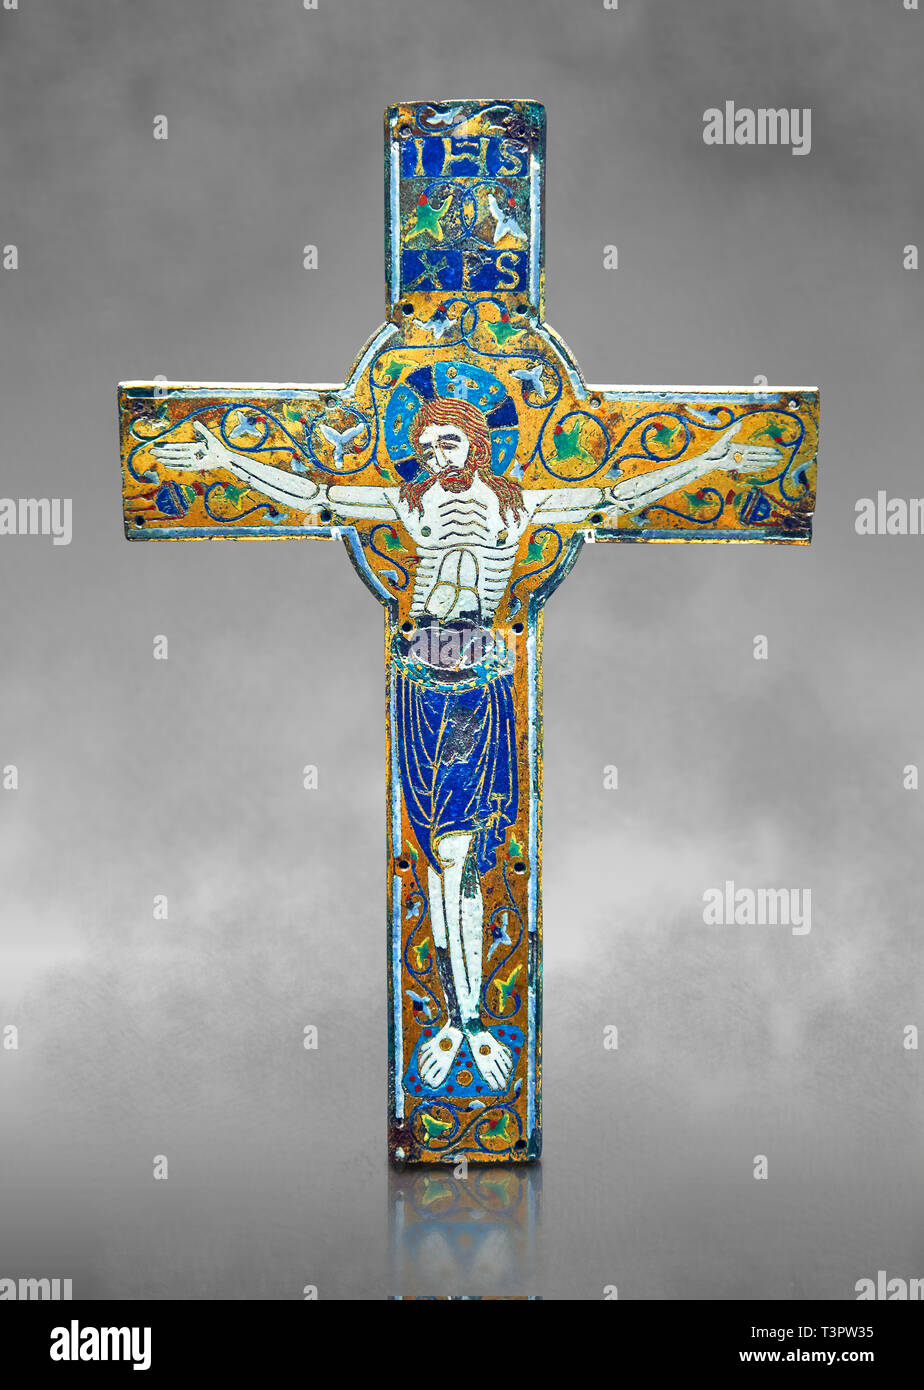 Medieval enamelled crucifix, end of the 12th century from Limoges, enamel on gold. AD. Inv OA 7284, The Louvre Museum, Paris. Stock Photo